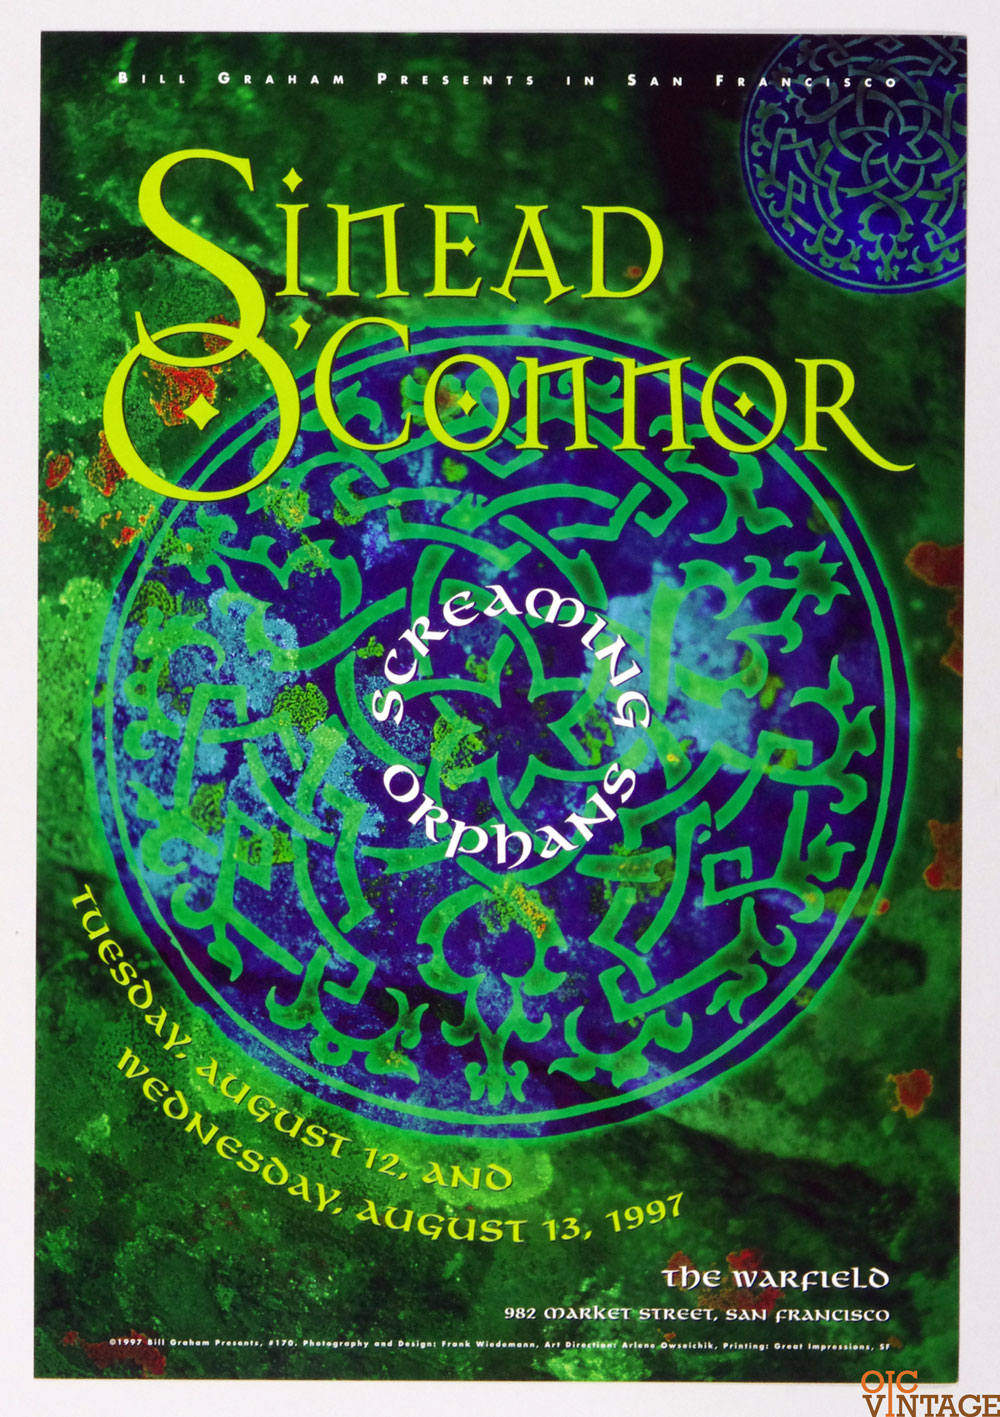 Sinead O'Connor Poster 1997 Aug 13 The Warfield Theatre San Francisco BGP 170